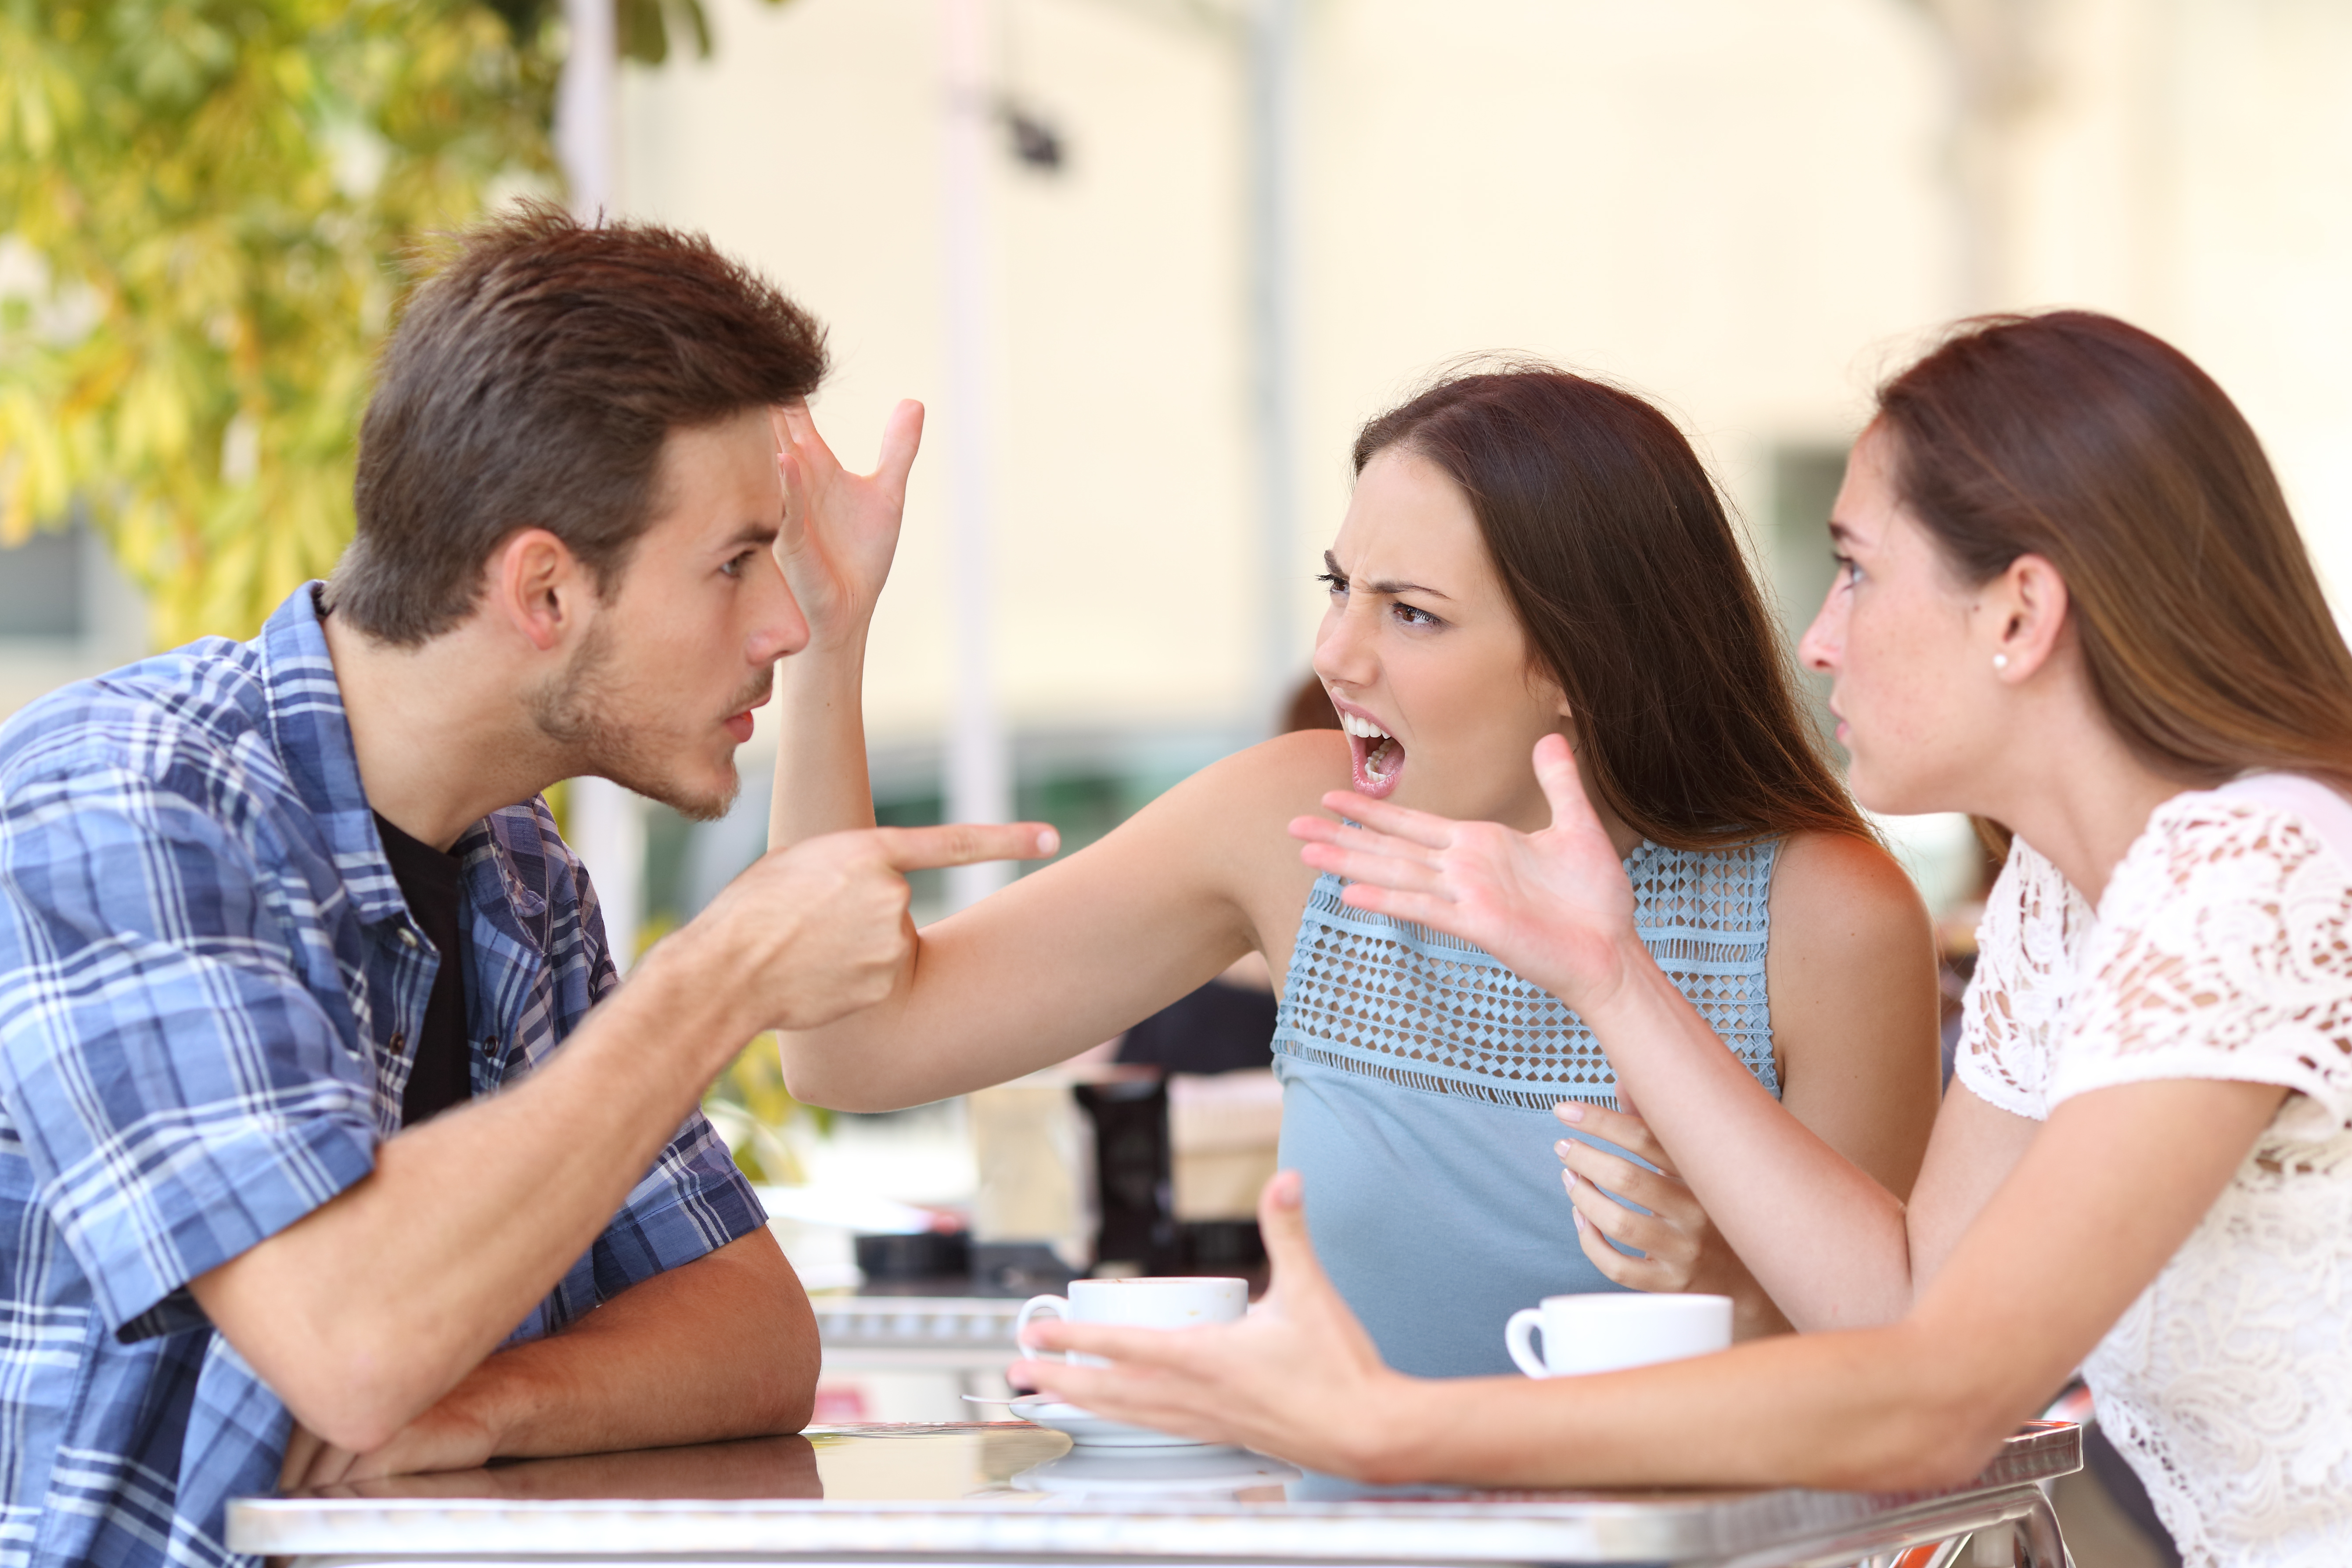 A man and two women arguing | Source: Shutterstock